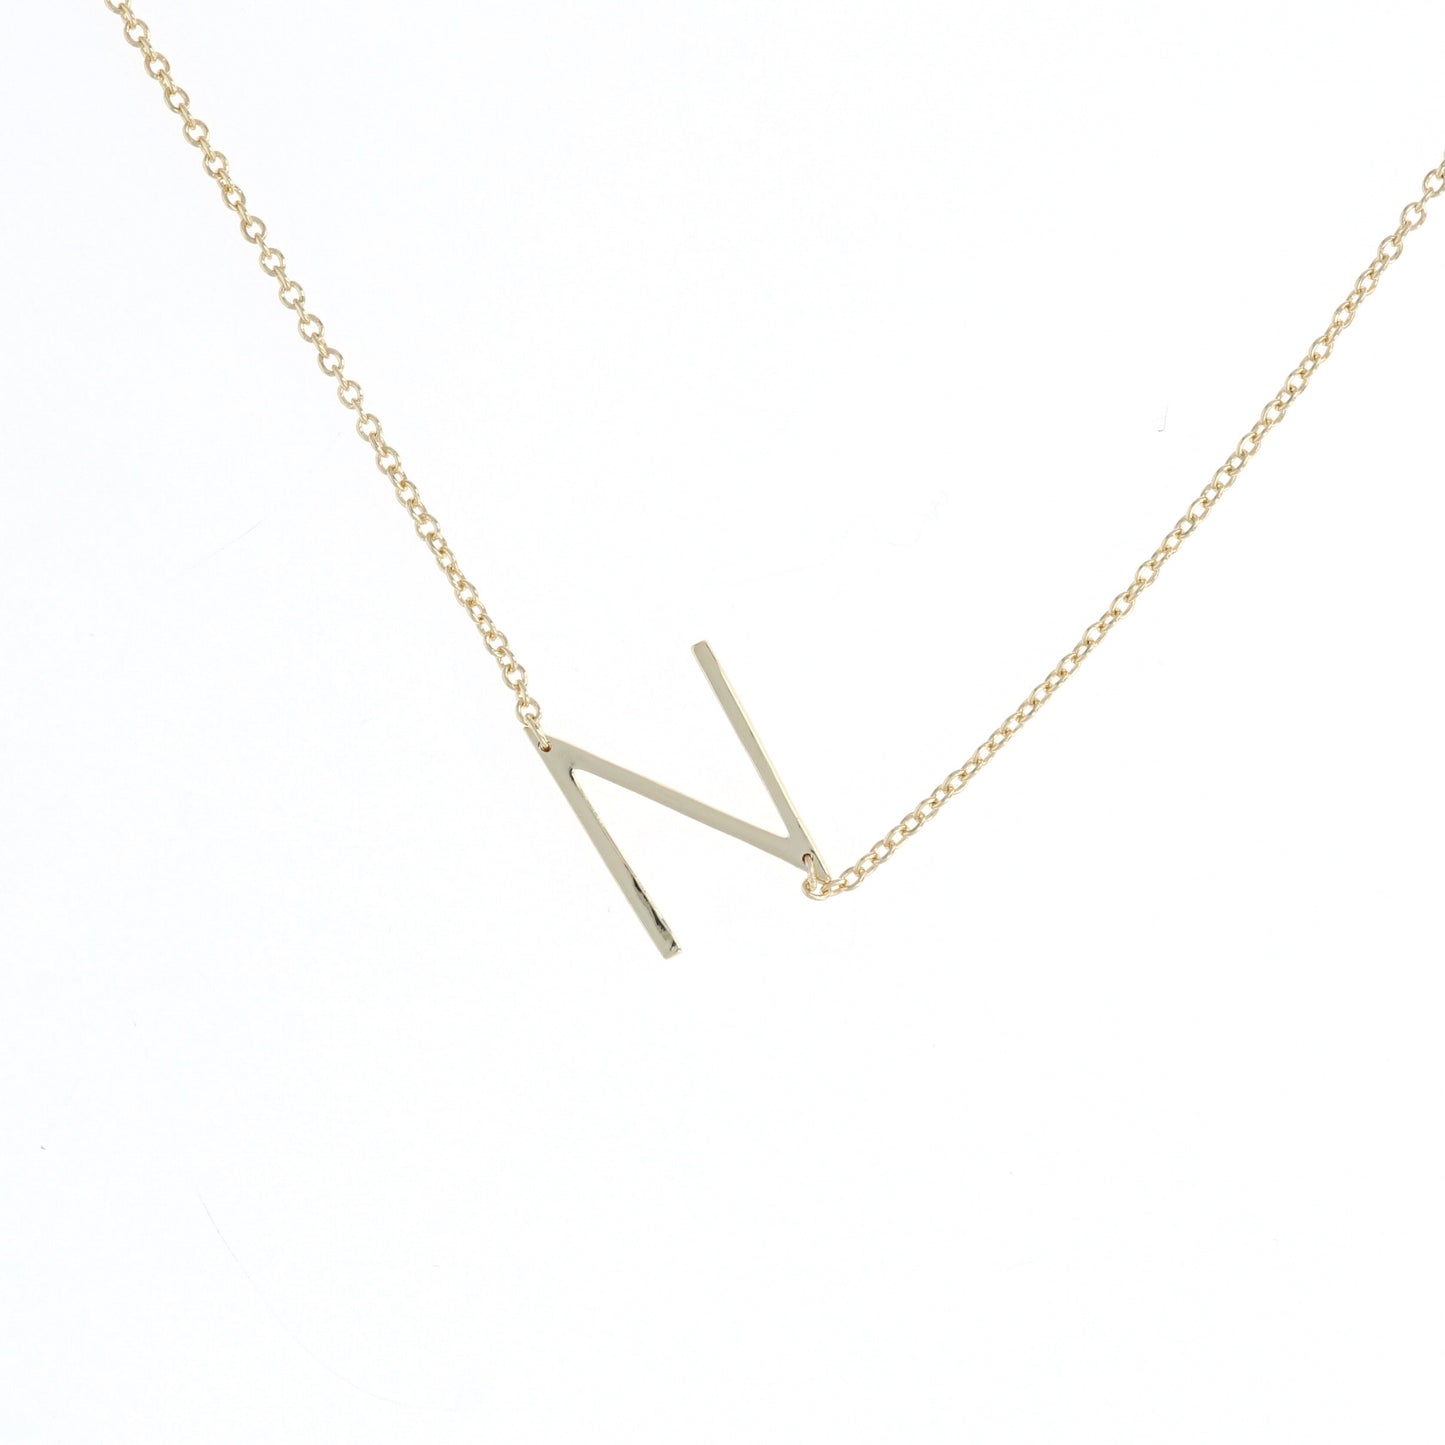 Sideways Letter N Initial Necklace in gold from Alexandra Marks Jewelry